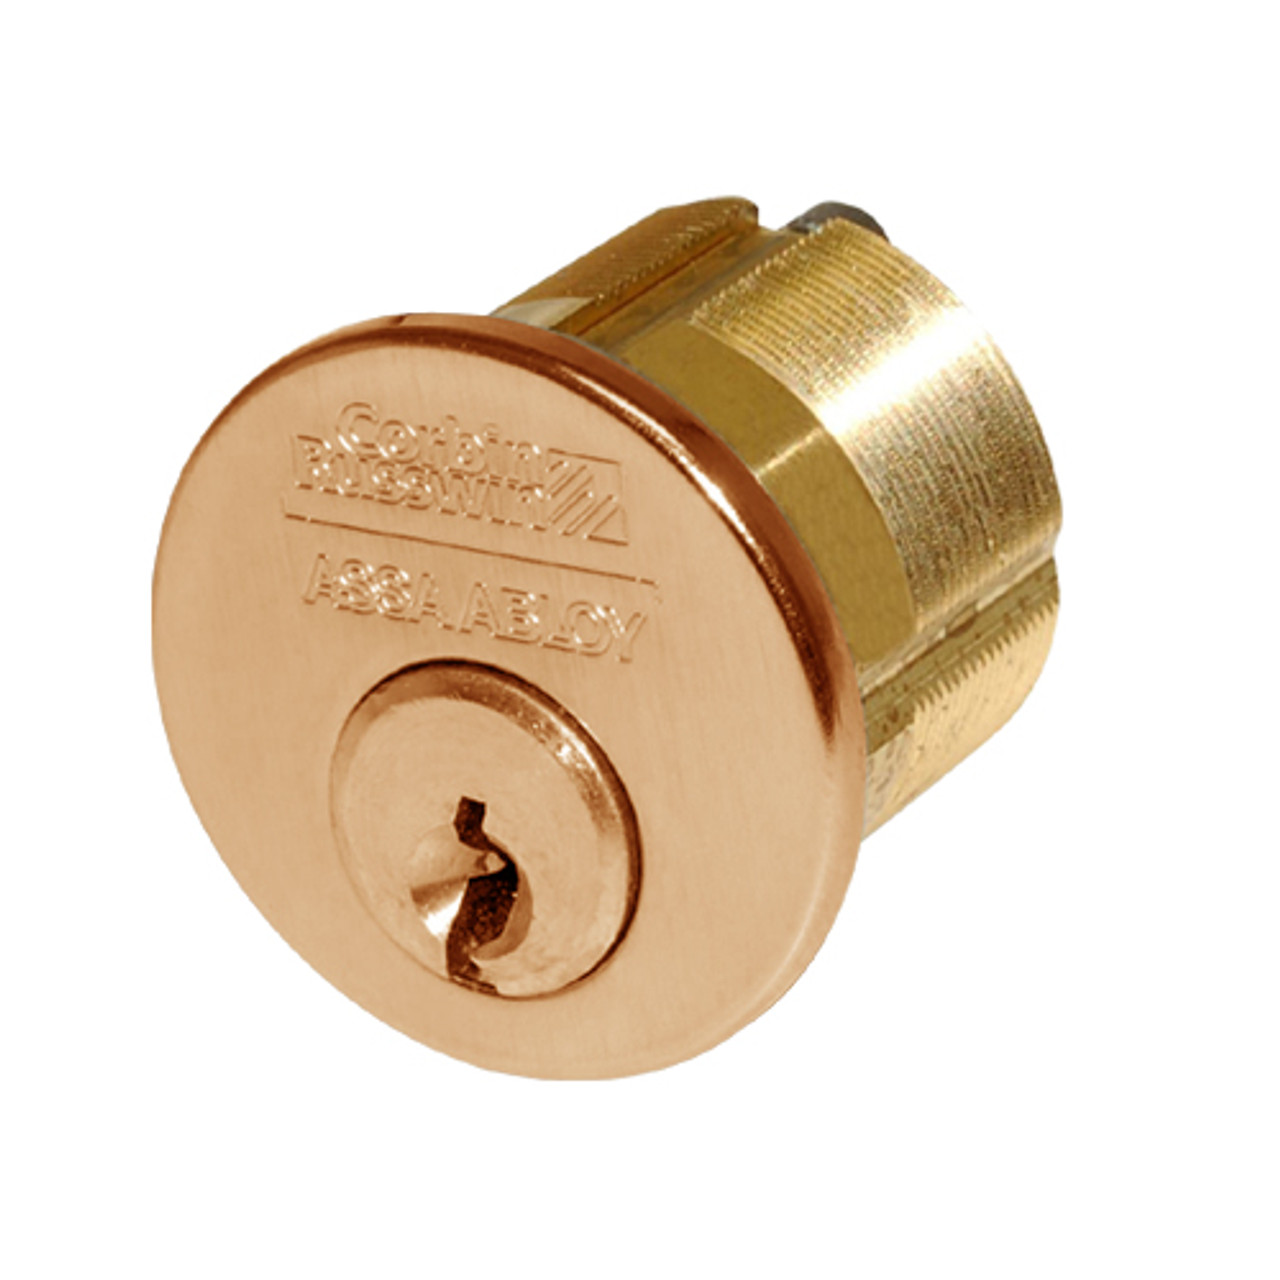 CR1000-138-A06-6-59A1-612 Corbin Conventional Mortise Cylinder for Mortise Lock and DL3000 Deadlocks with Schlage L9000 Cam in Satin Bronze Finish